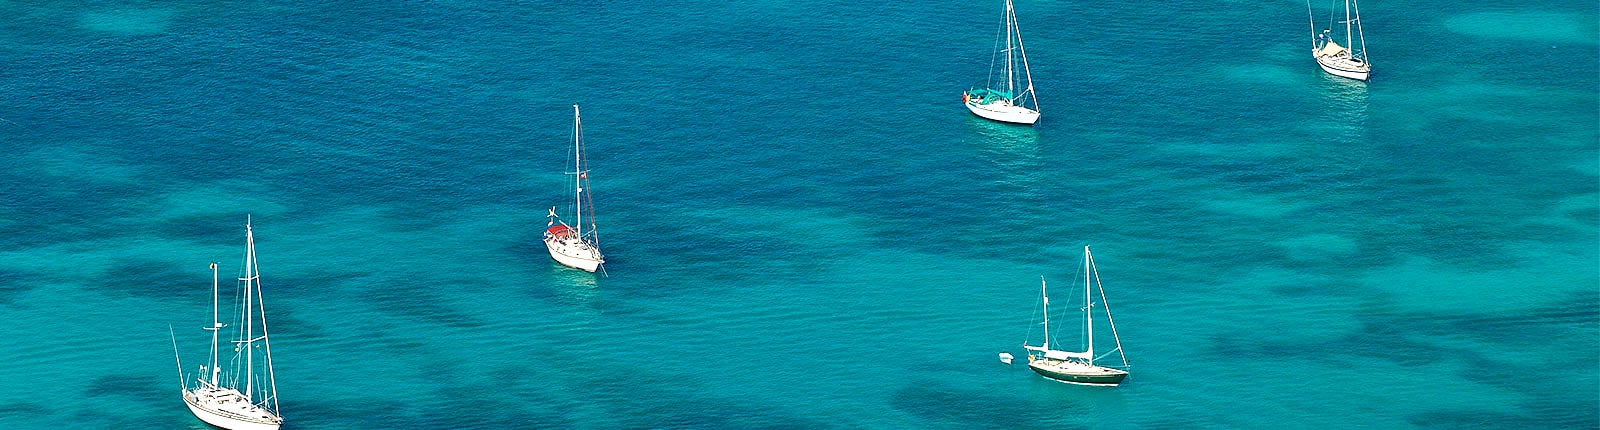 Aerial view of sailboats anchored in shallow waters of St. Maarten